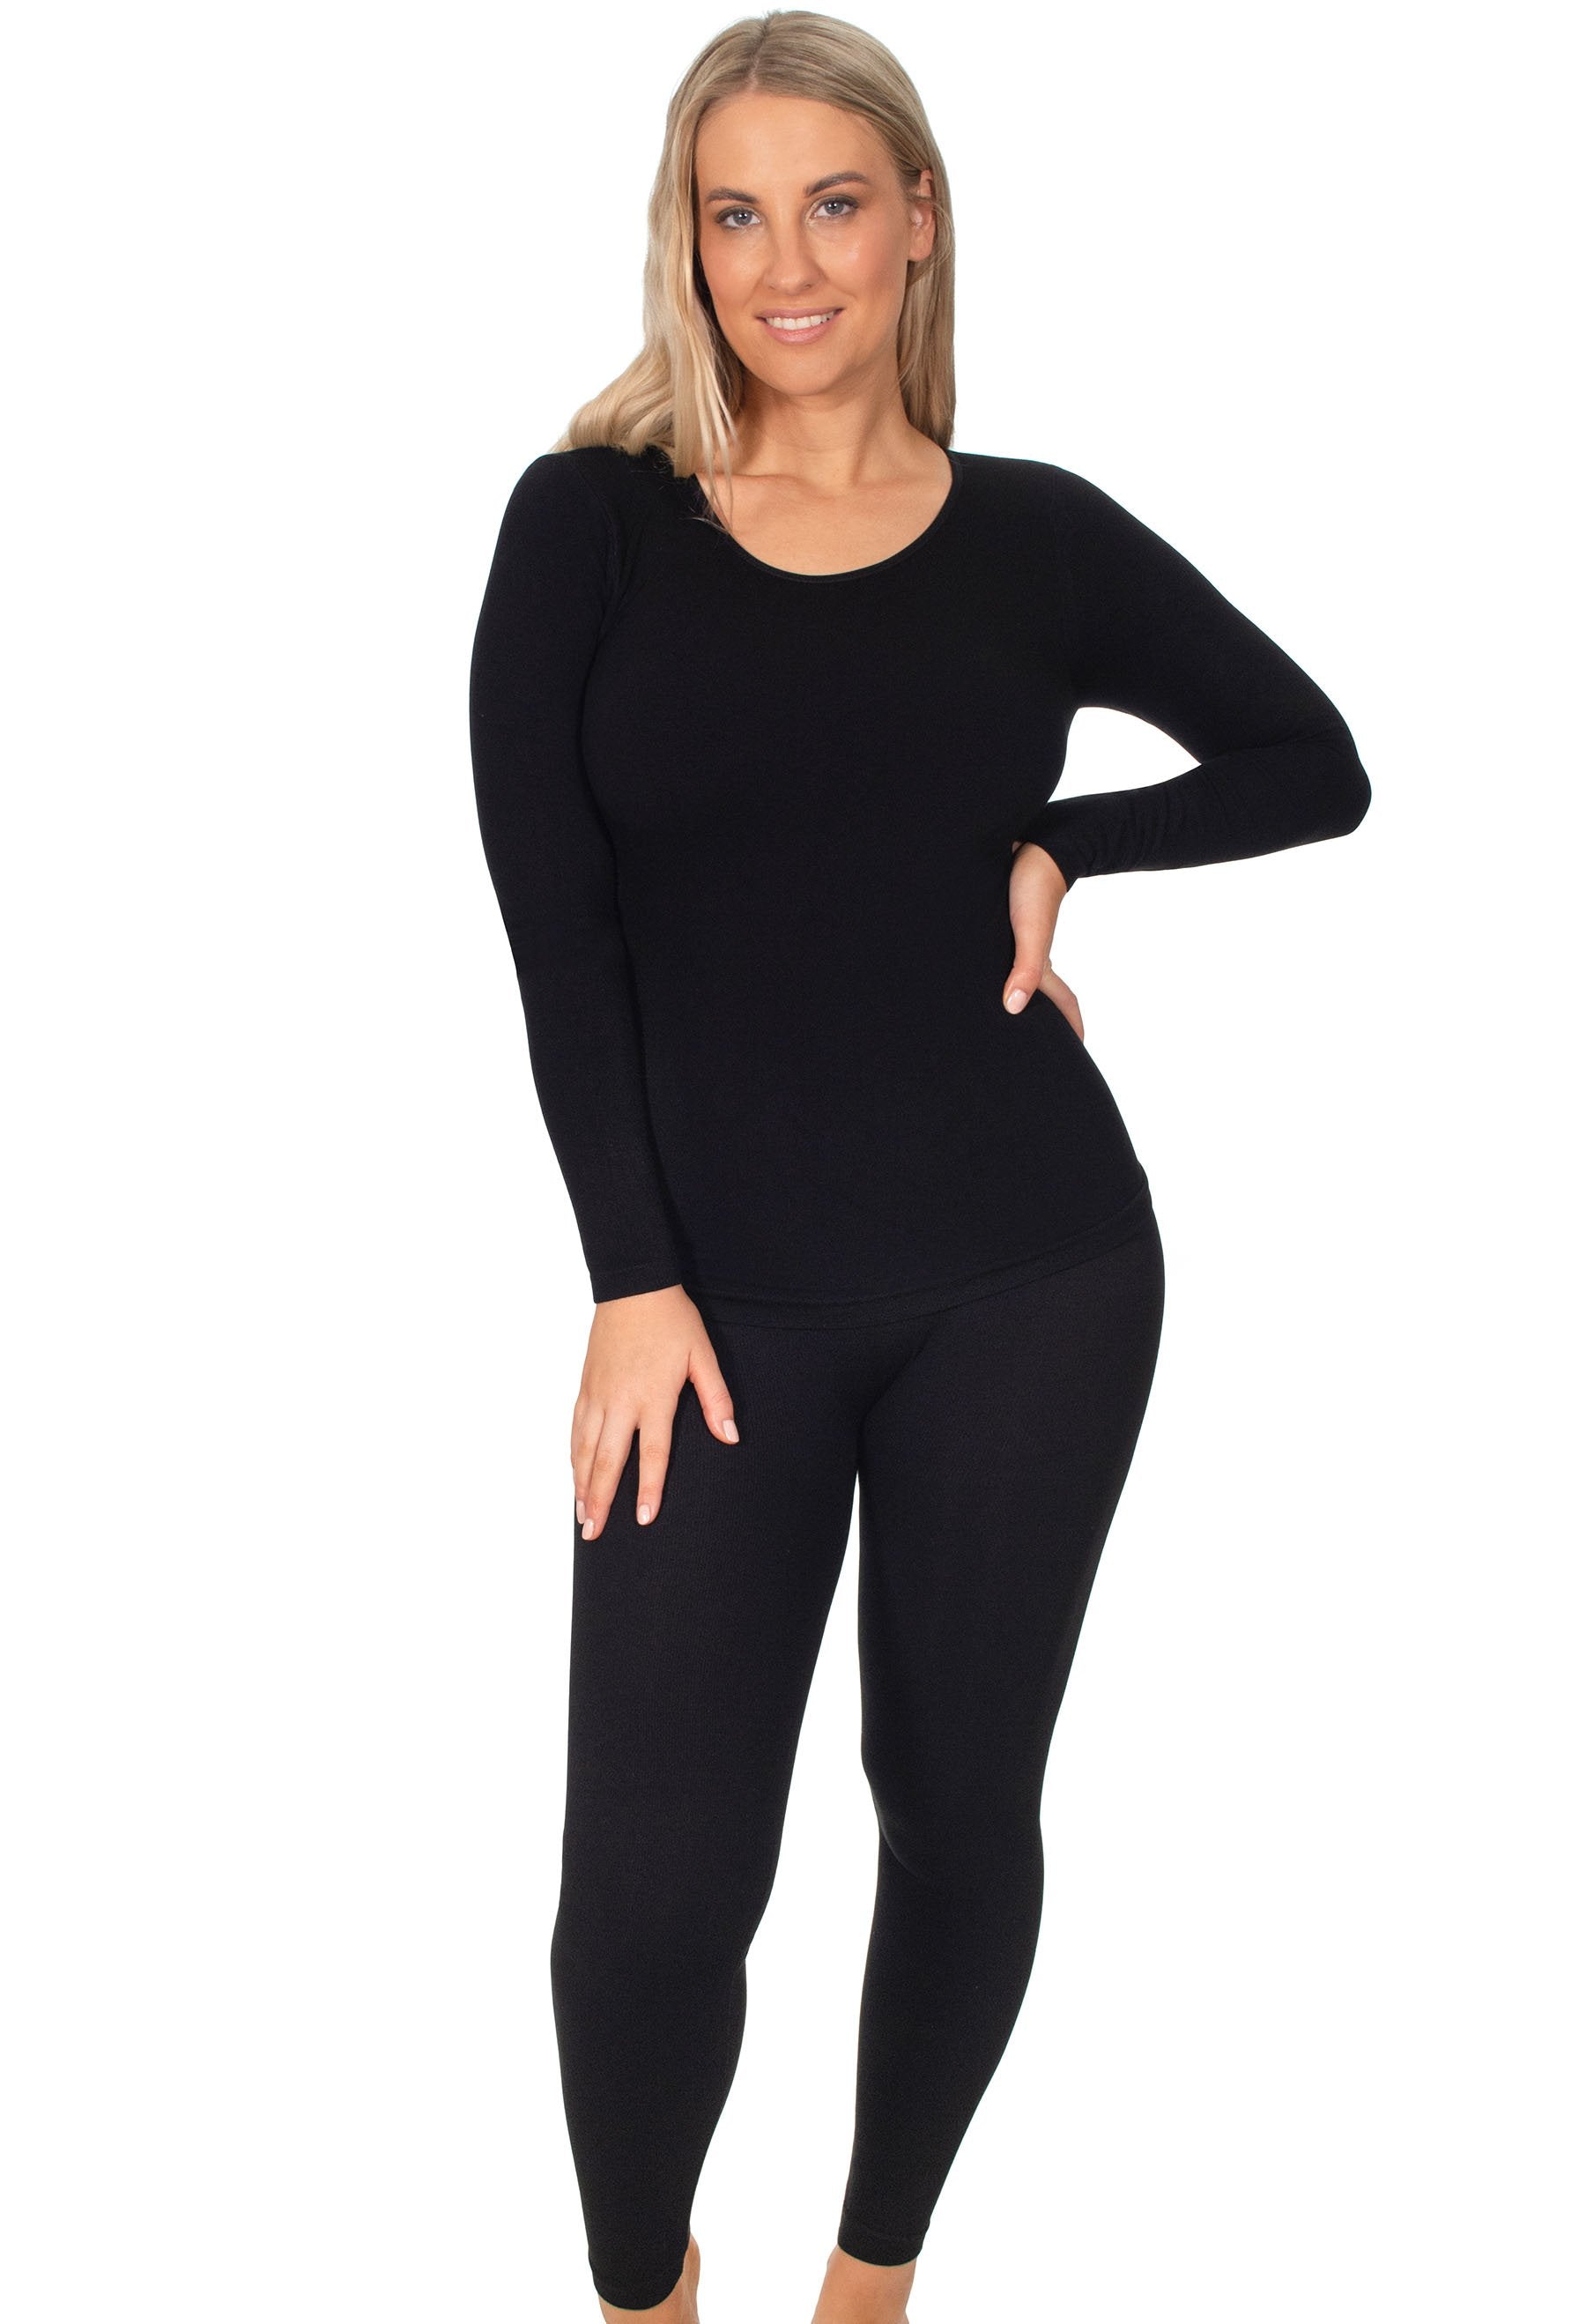 Women Thermal Seet (Inner with Trouser) Winter Wear Slim Structure Seamless